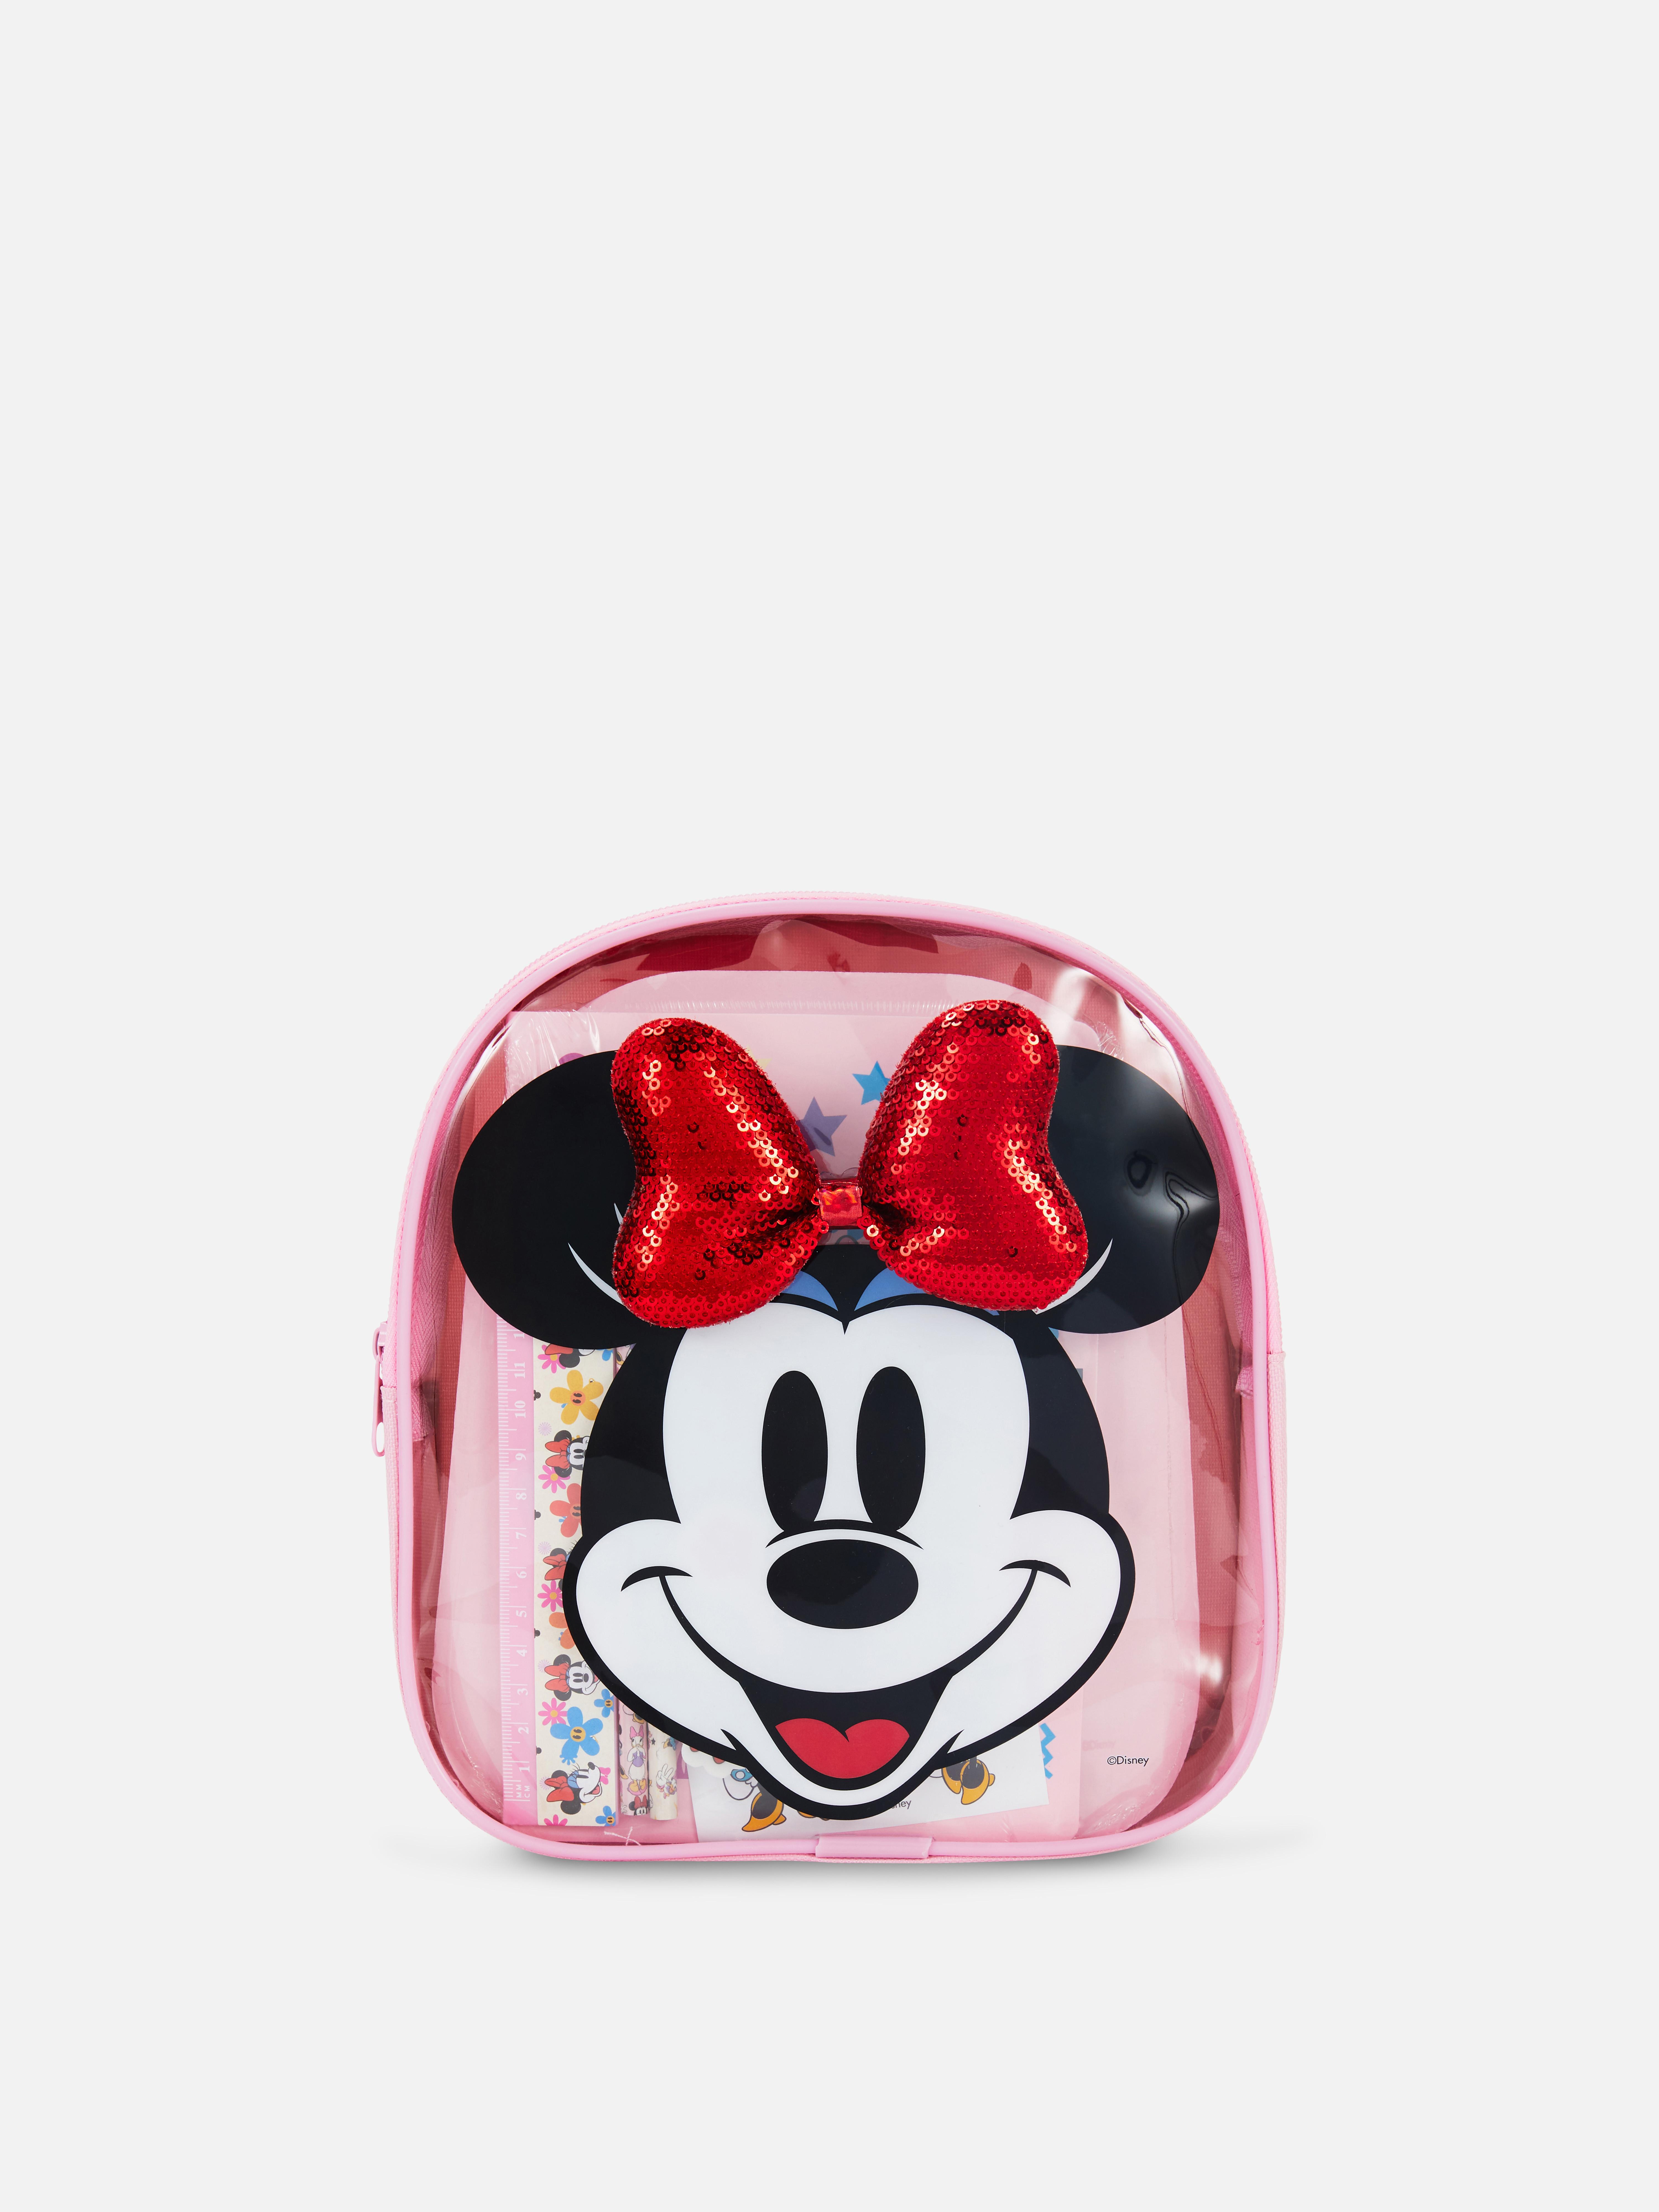 Disney’s Minnie Mouse Backpack